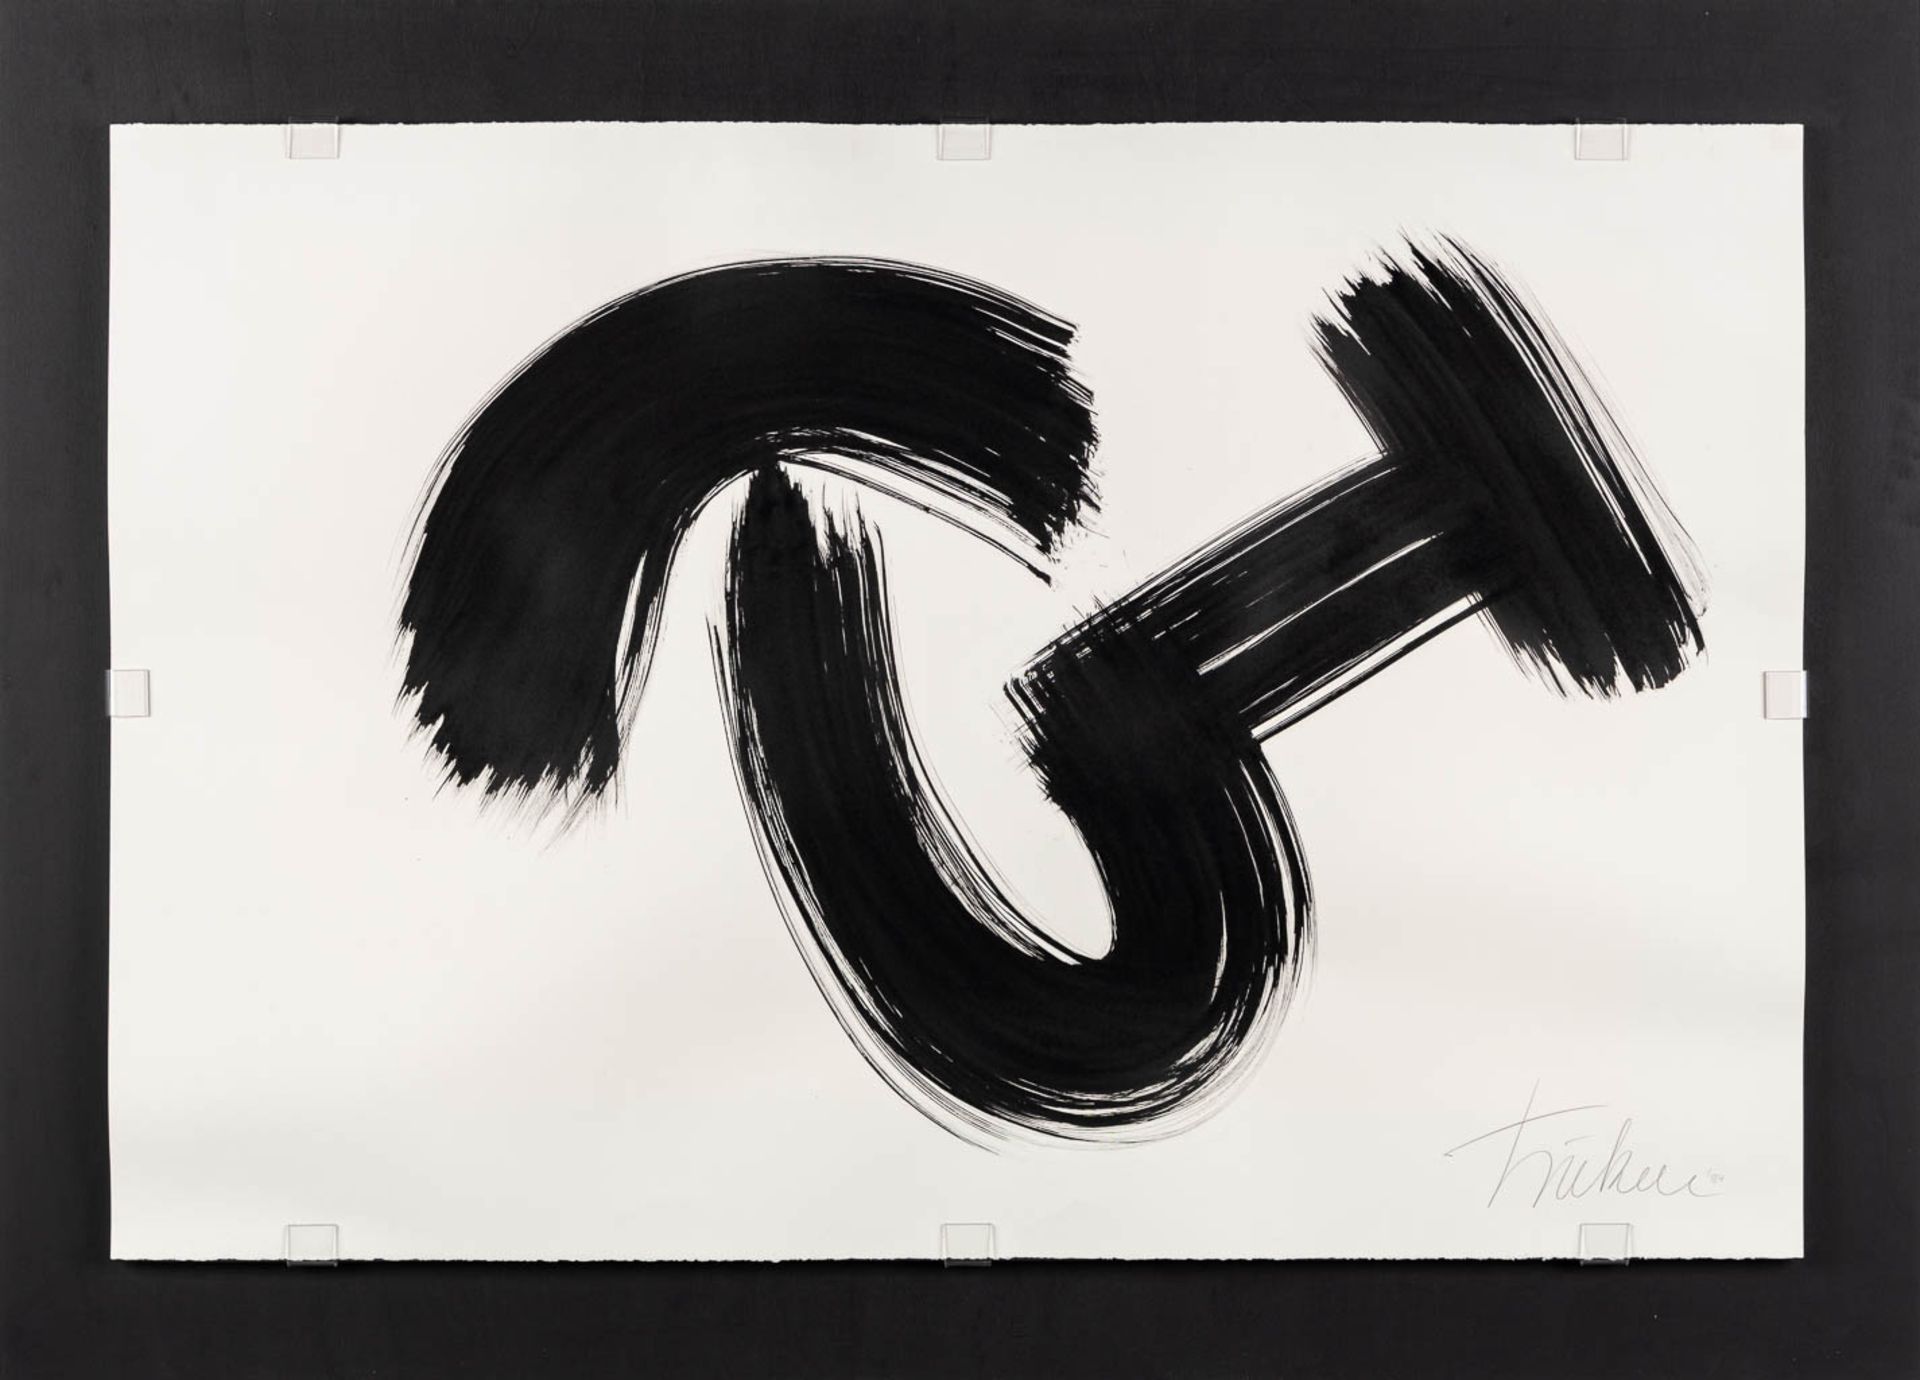 TSUKAI (XX) 'Calligraphy' eastern Indian ink on paper. (W:95 x H:64 cm)